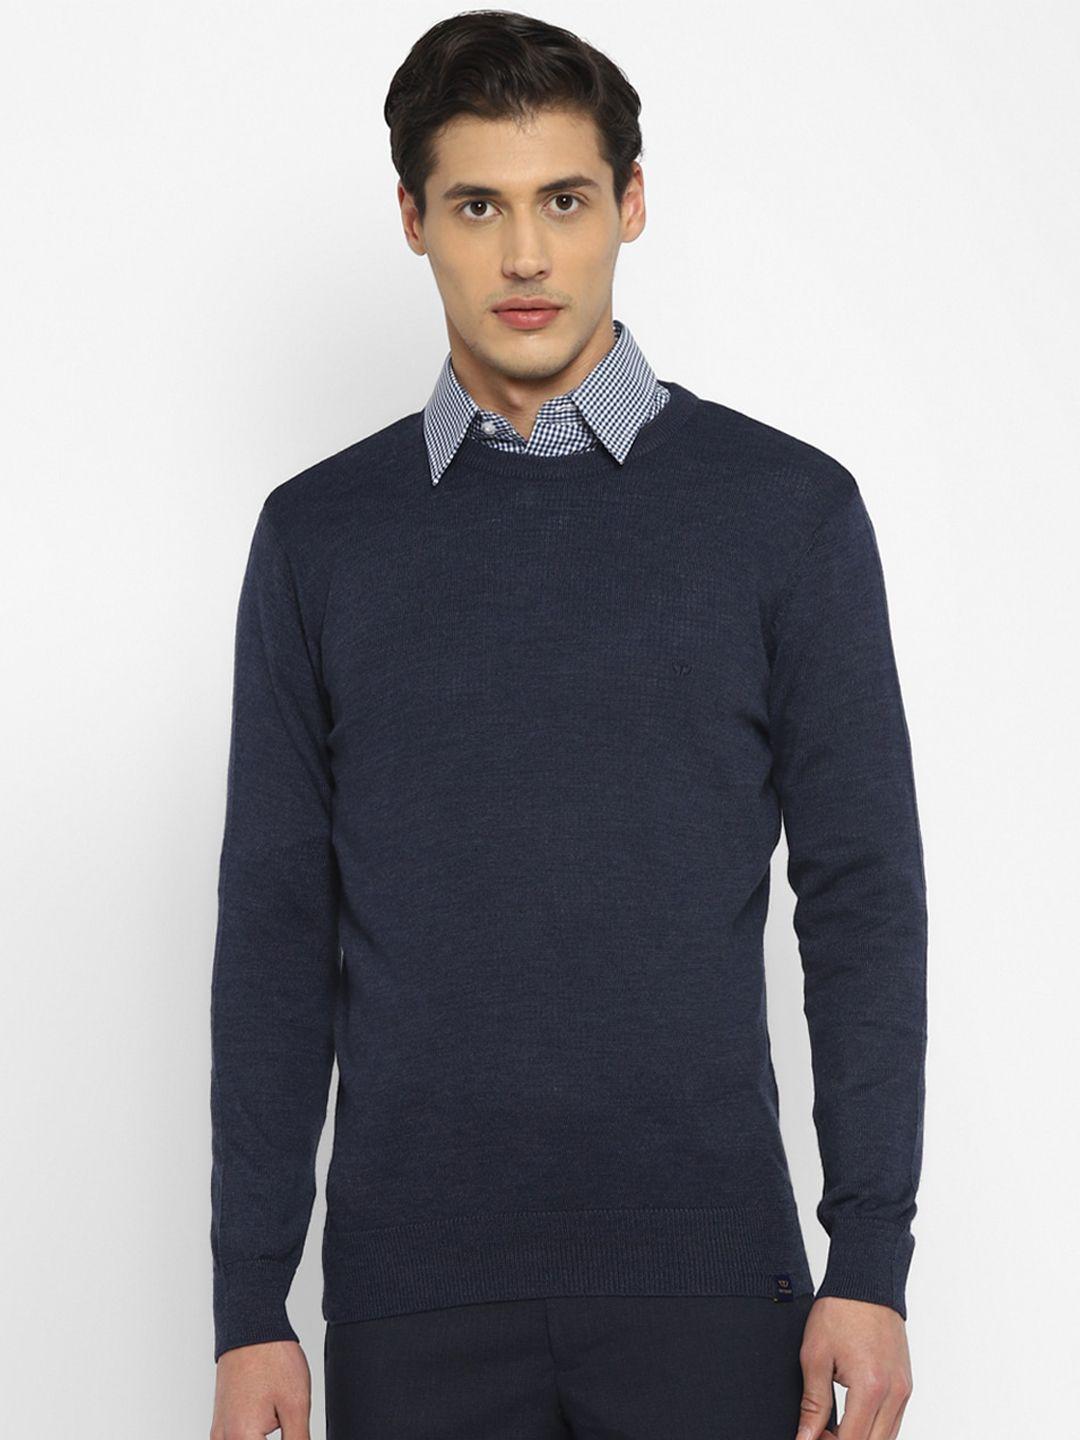 top-brass-wool-pullover-sweater